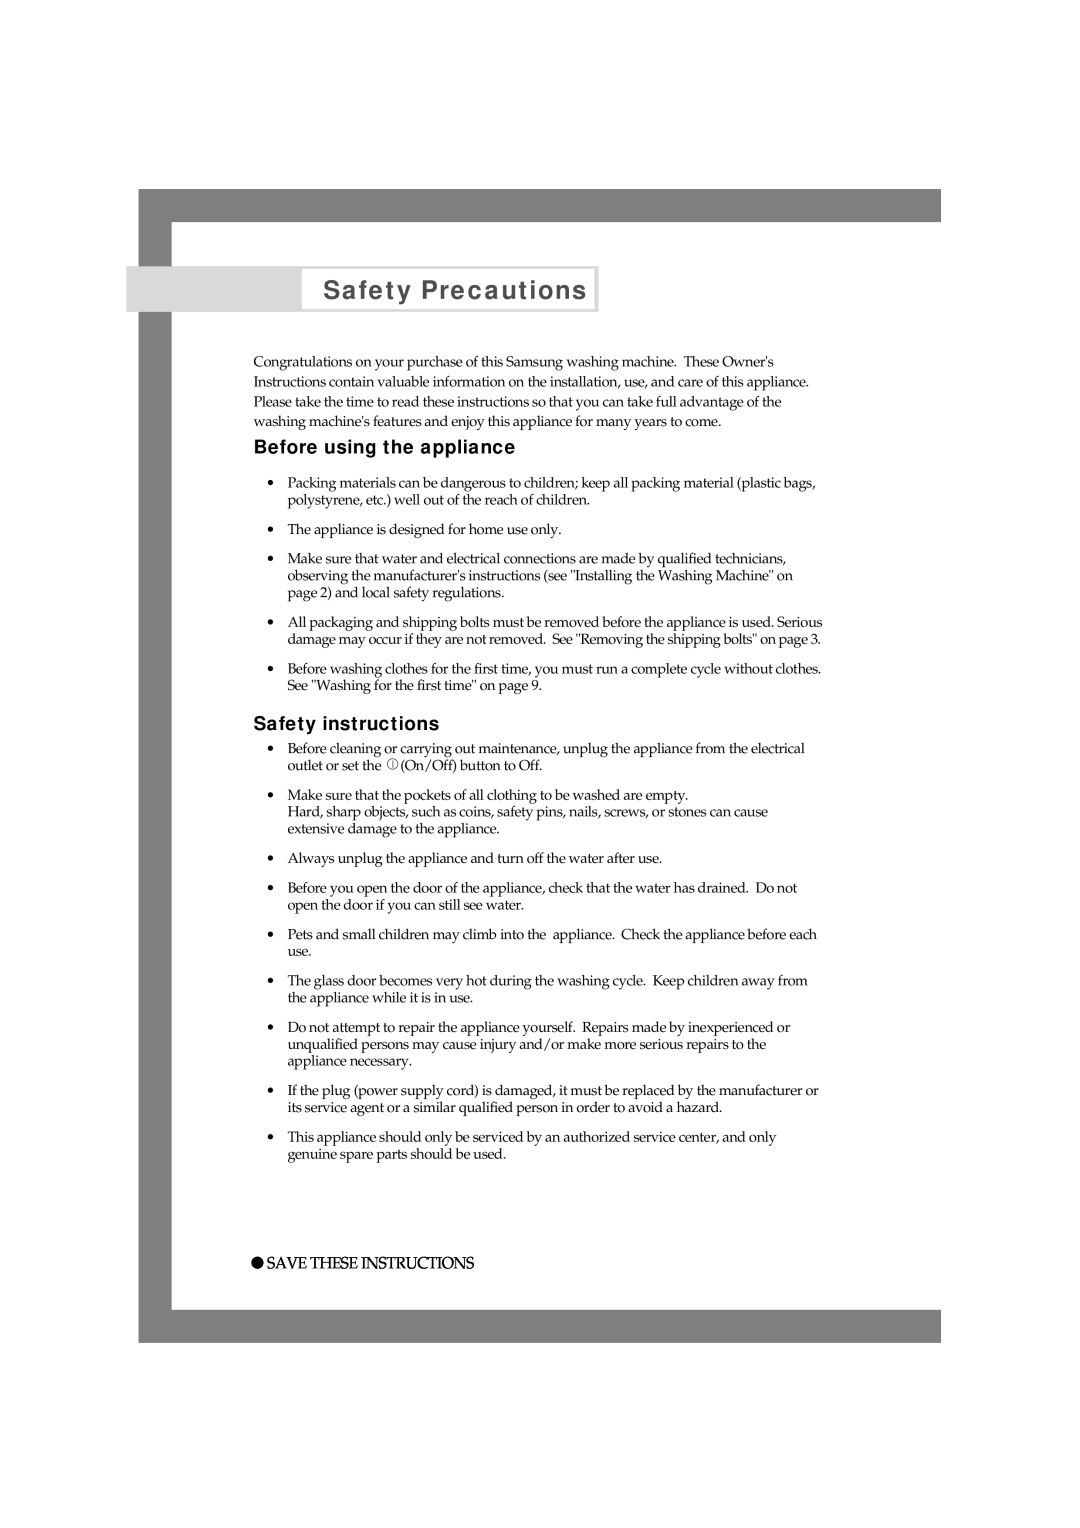 Samsung P1005j, P805J, P1405J Safety Precautions, Before using the appliance, Safety instructions, Save These Instructions 